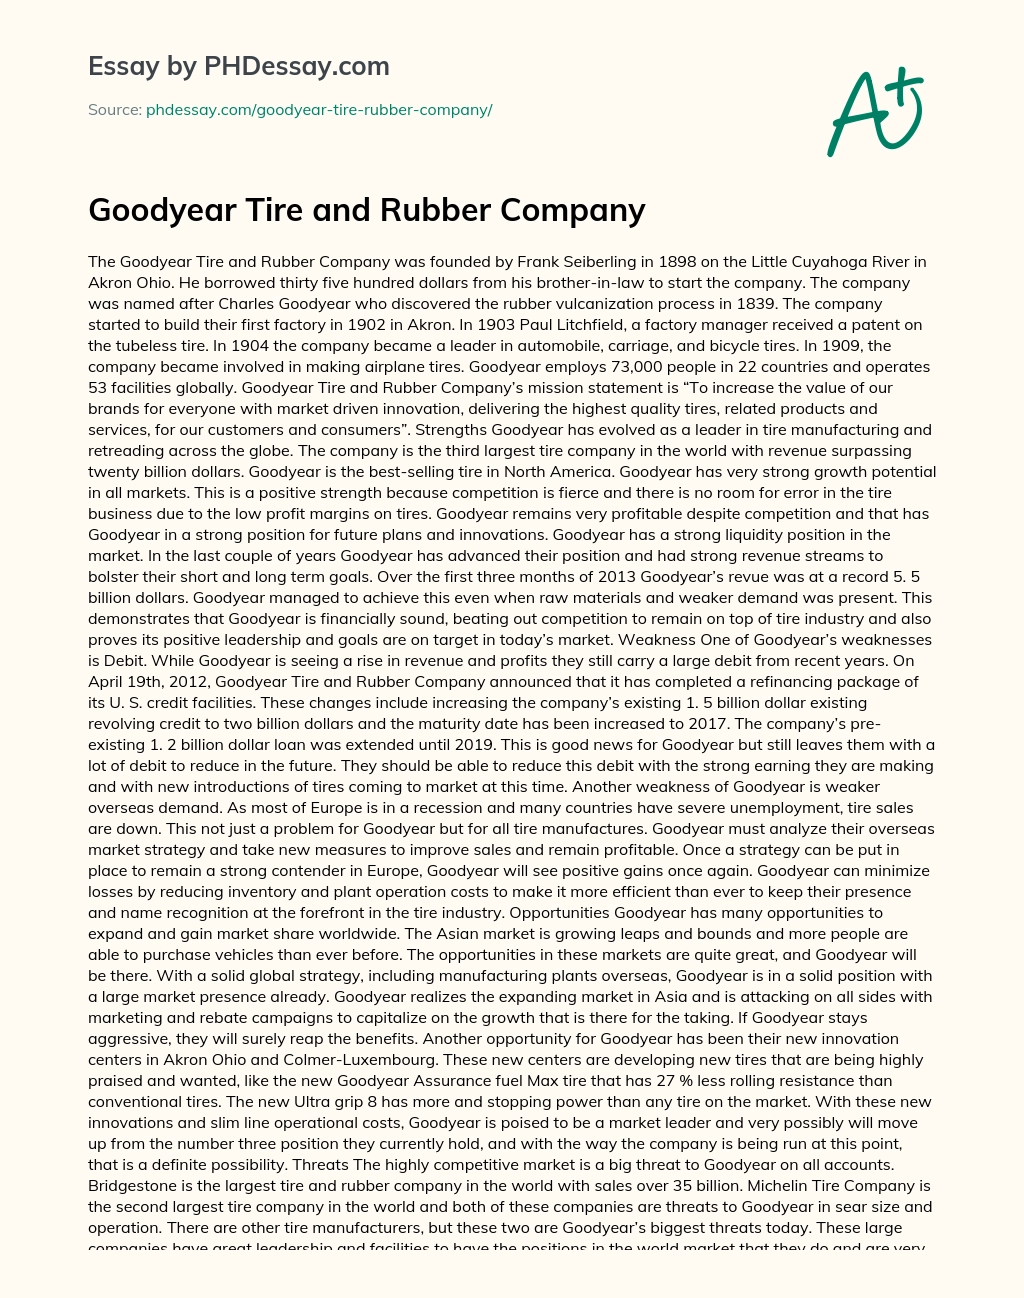 Goodyear Tire and Rubber Company essay